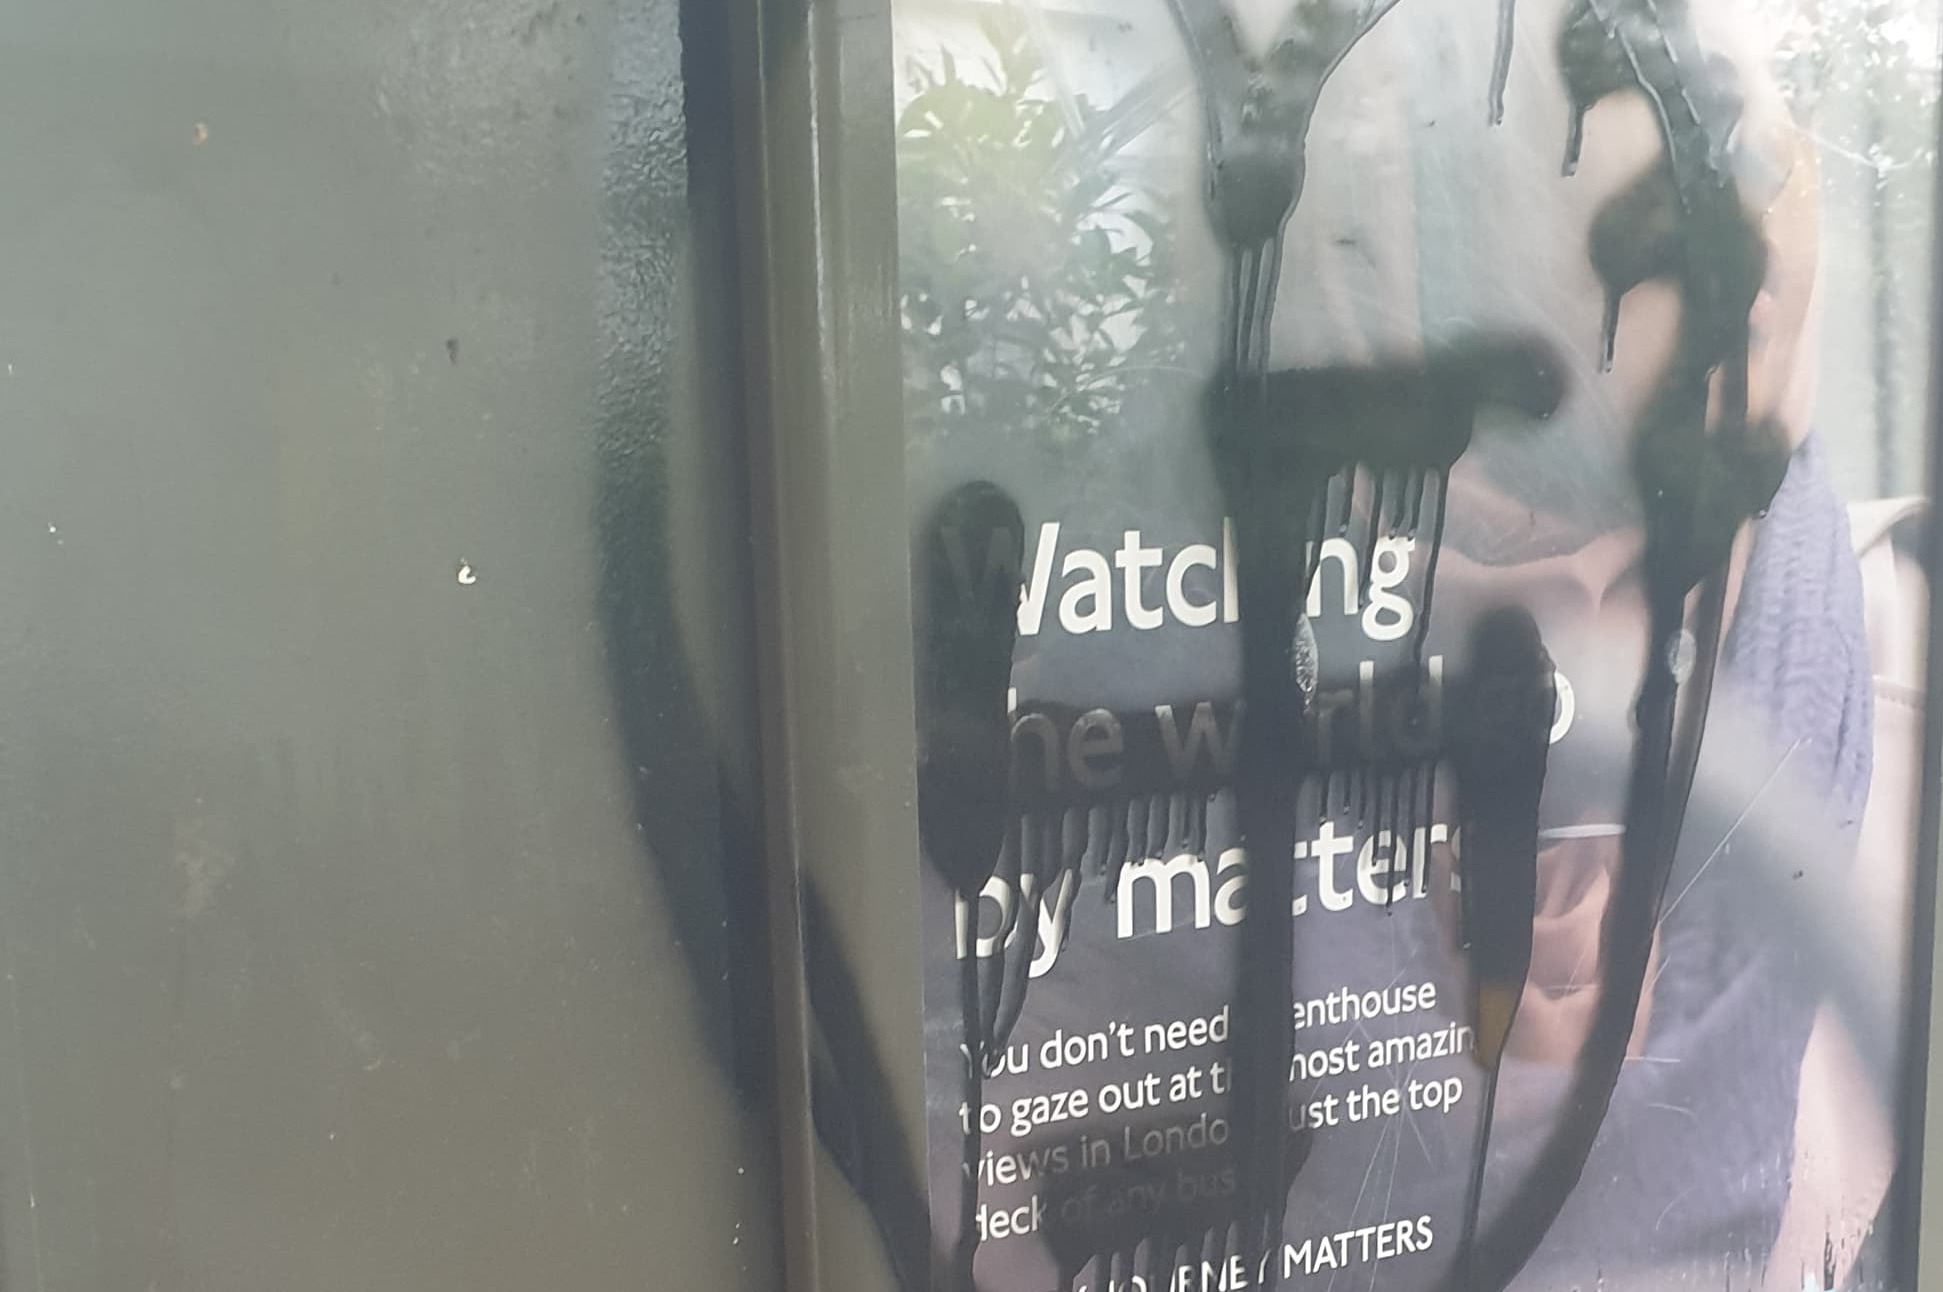 Bexley bus stop defaced with graffiti swastikas